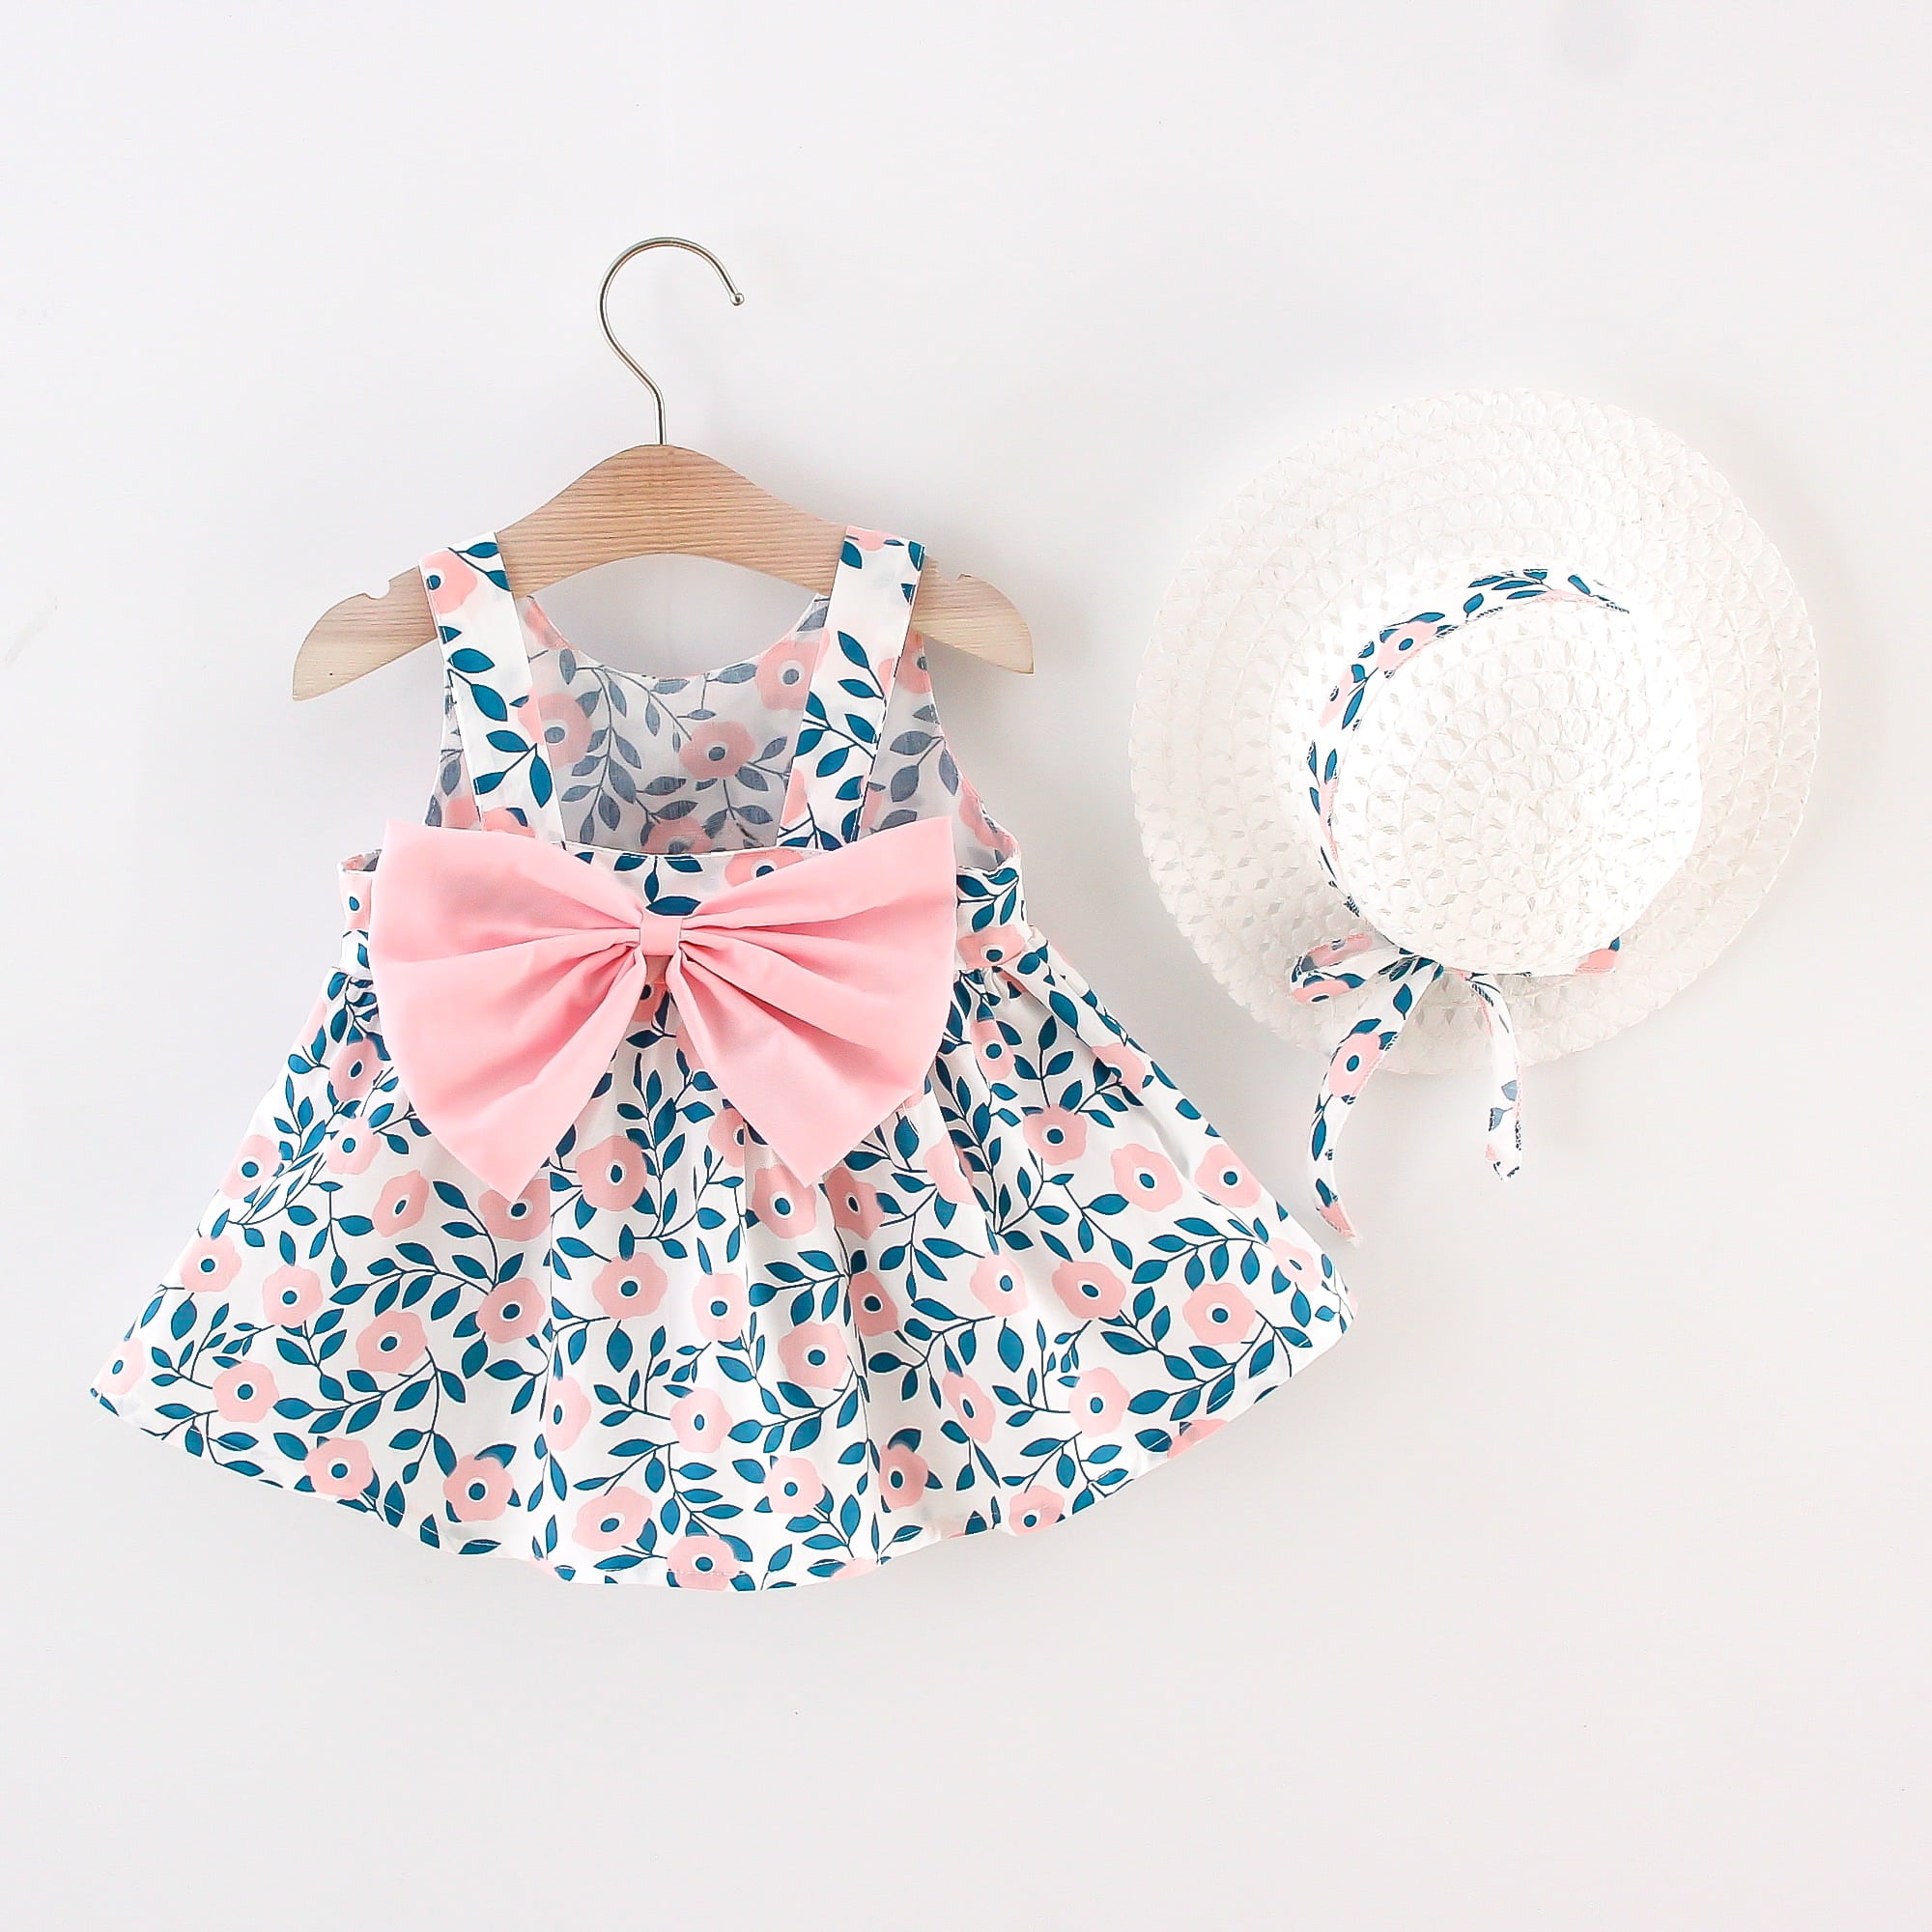 Toddler Baby Kids Girls Sleeveless Flowers Princess Dresses+Bow Hat Outfits Set 